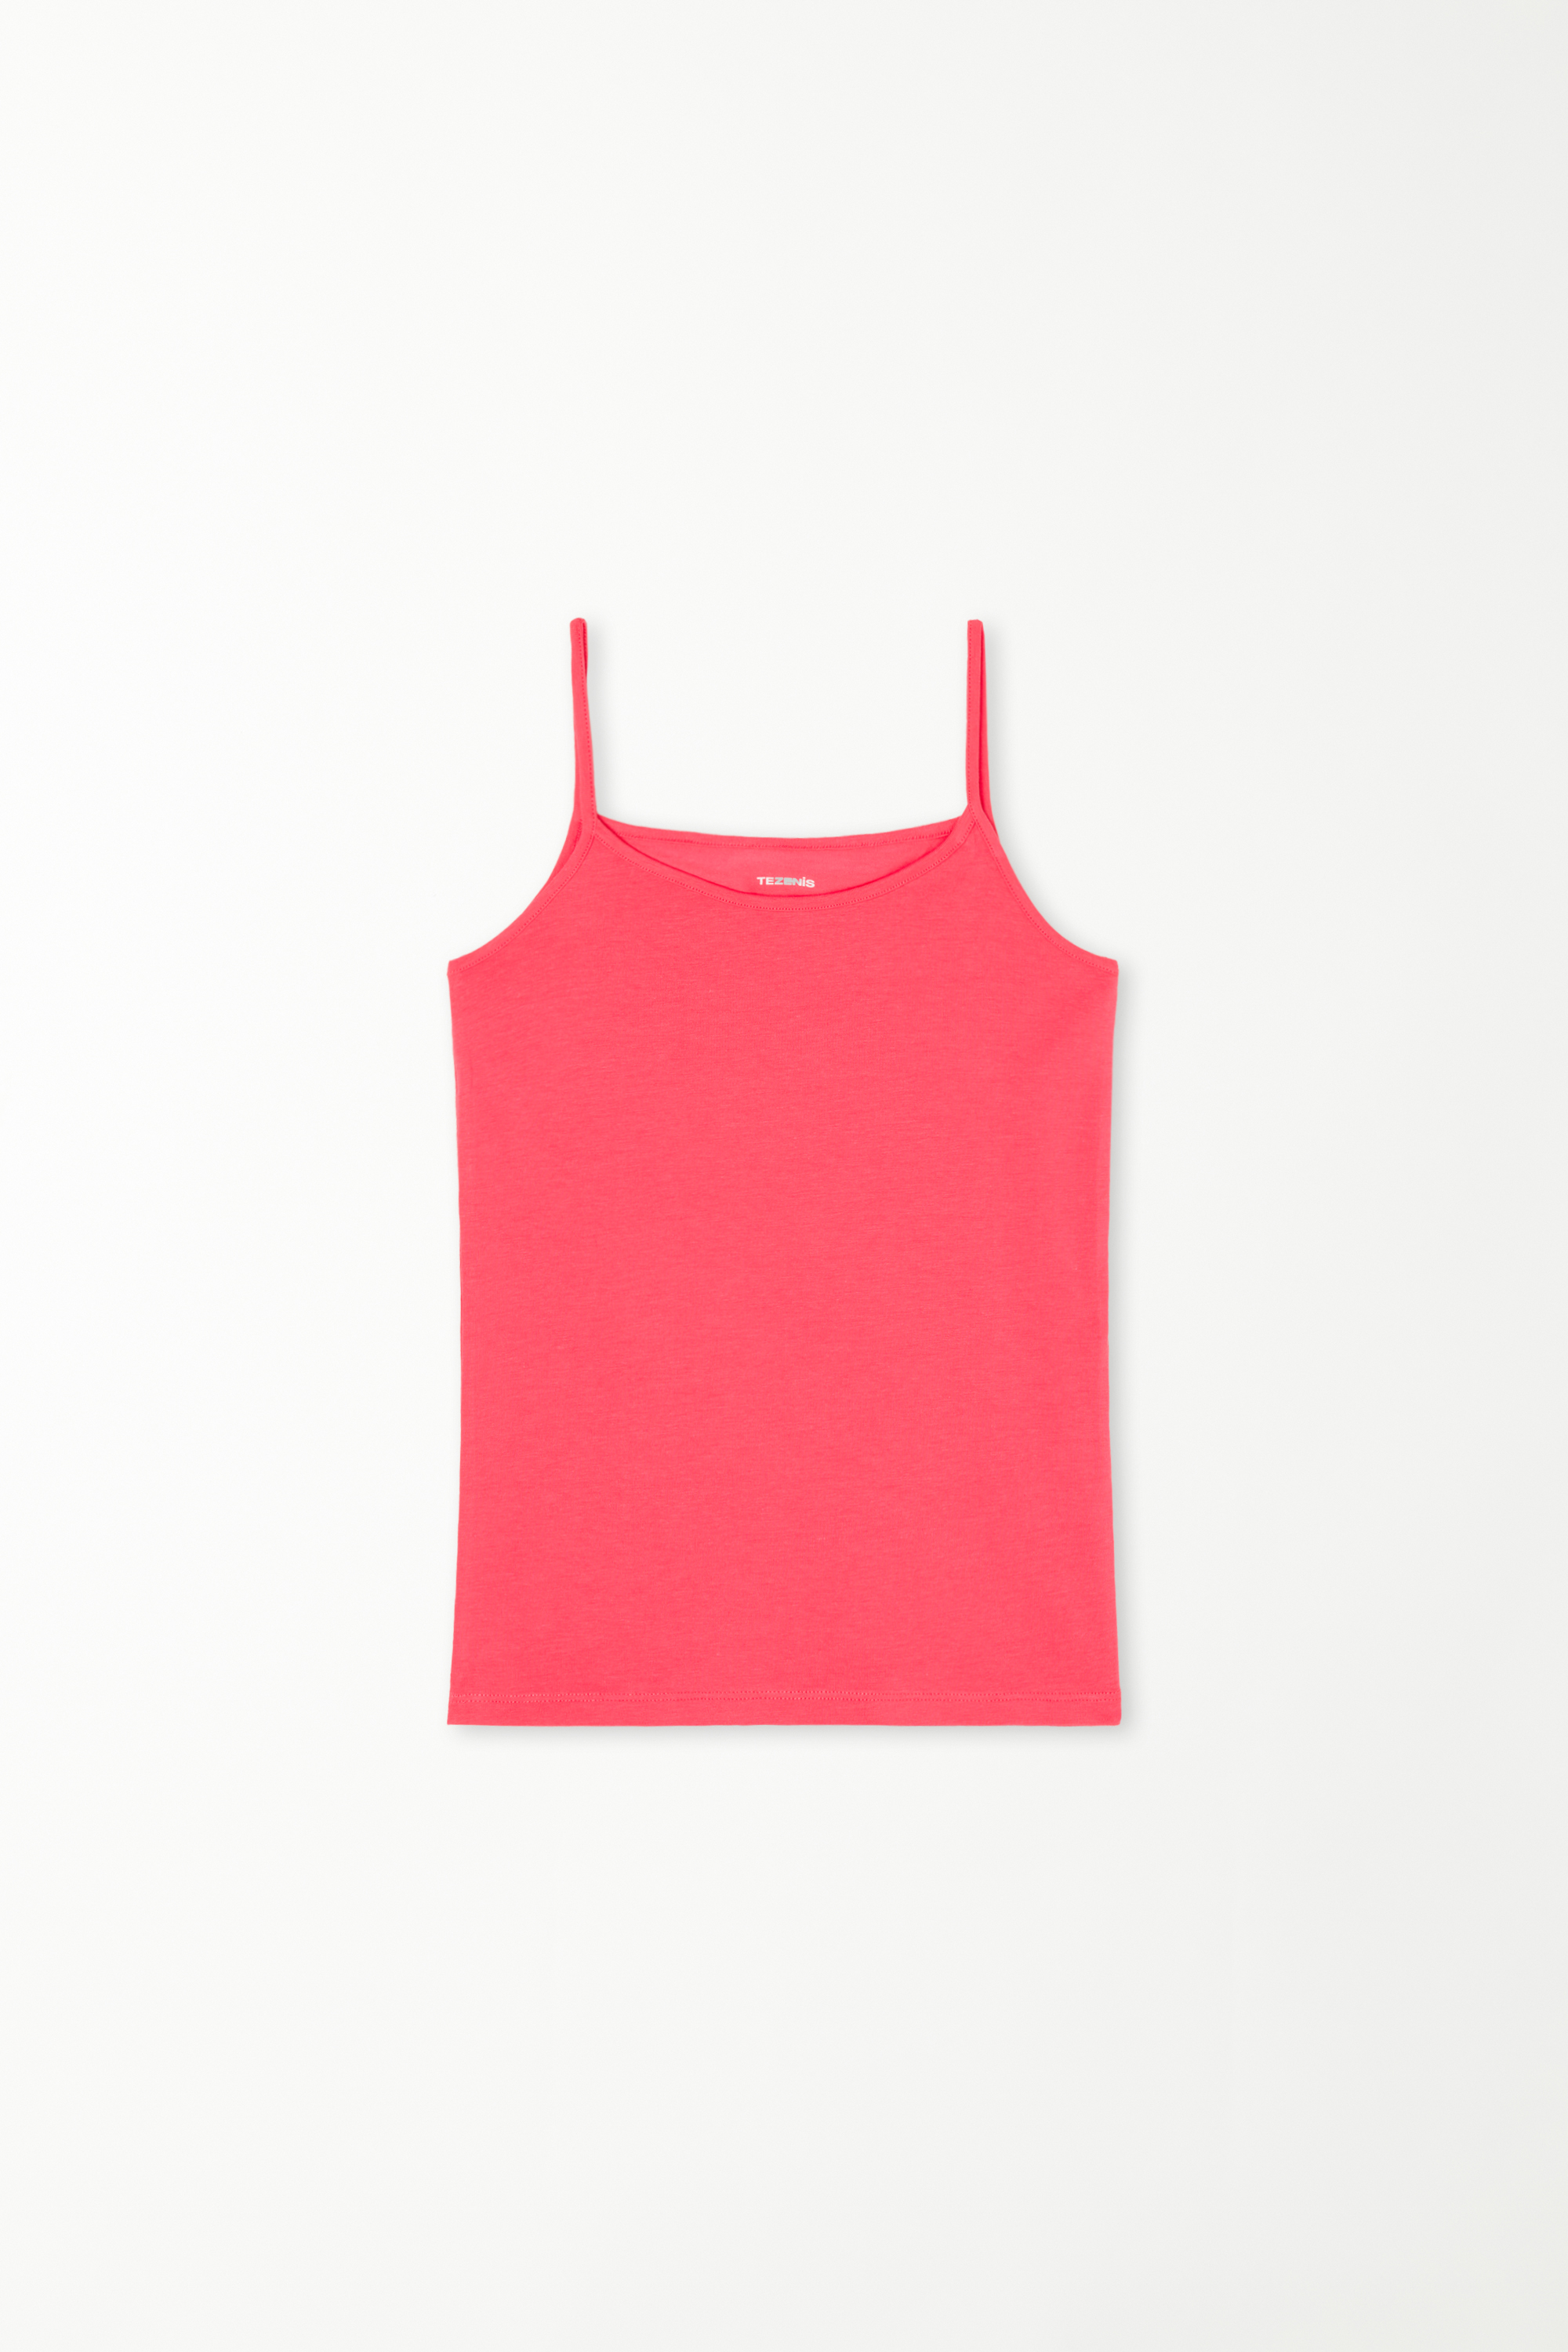 Girls’ Cotton Camisole with Thin Shoulder Straps and Rounded Neck